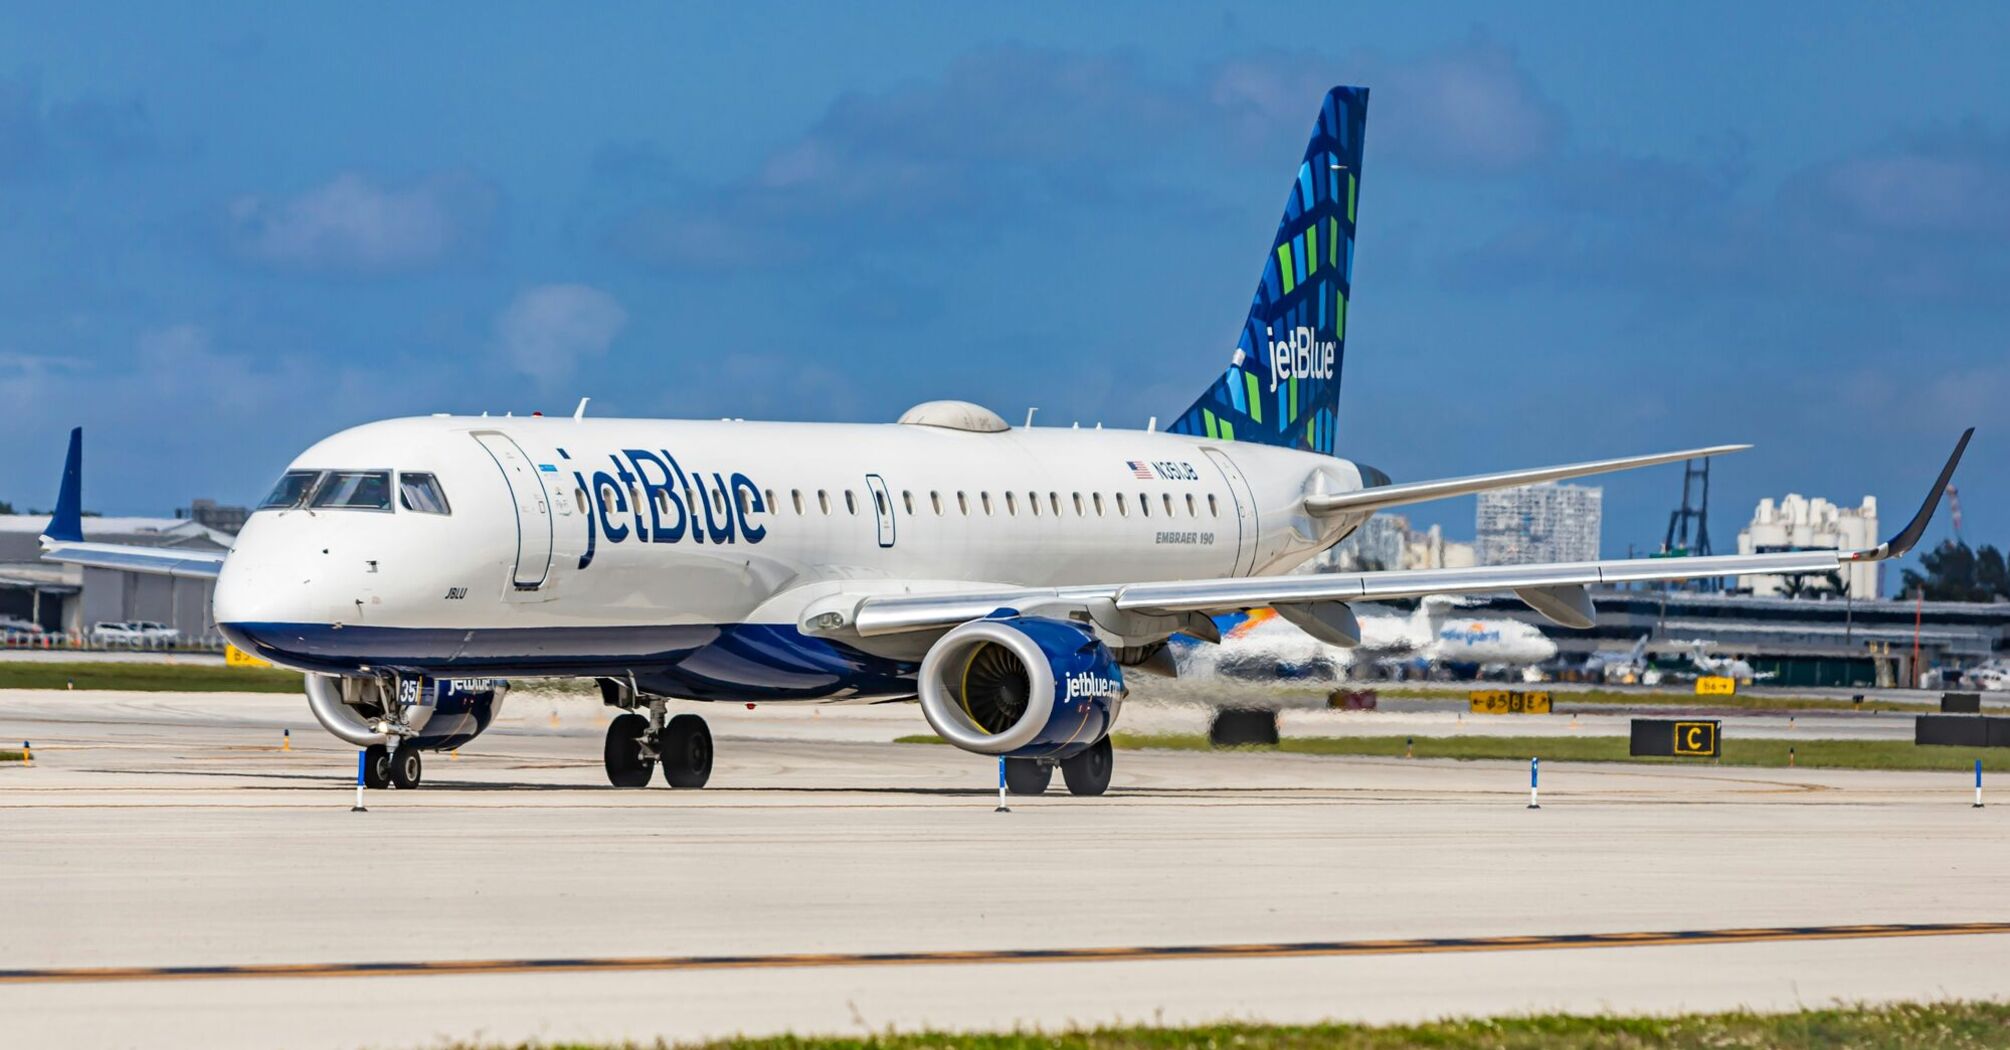 JetBlue Embraer 190 aircraft taxiing on the runway with the airline's distinctive livery